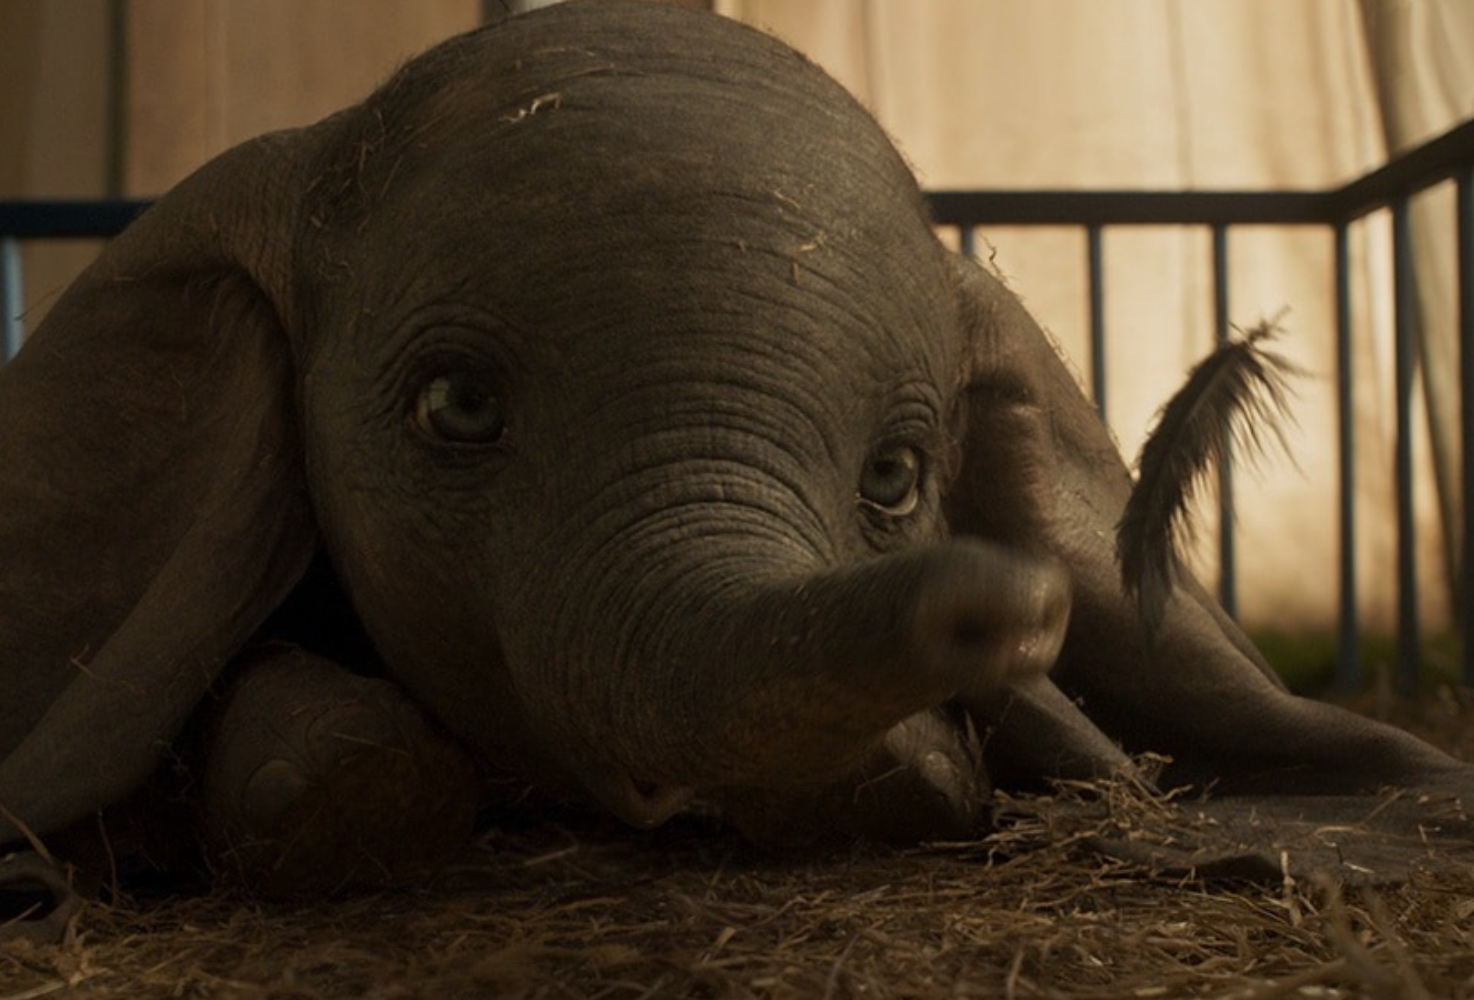 What Critics Are Saying About 'Dumbo'